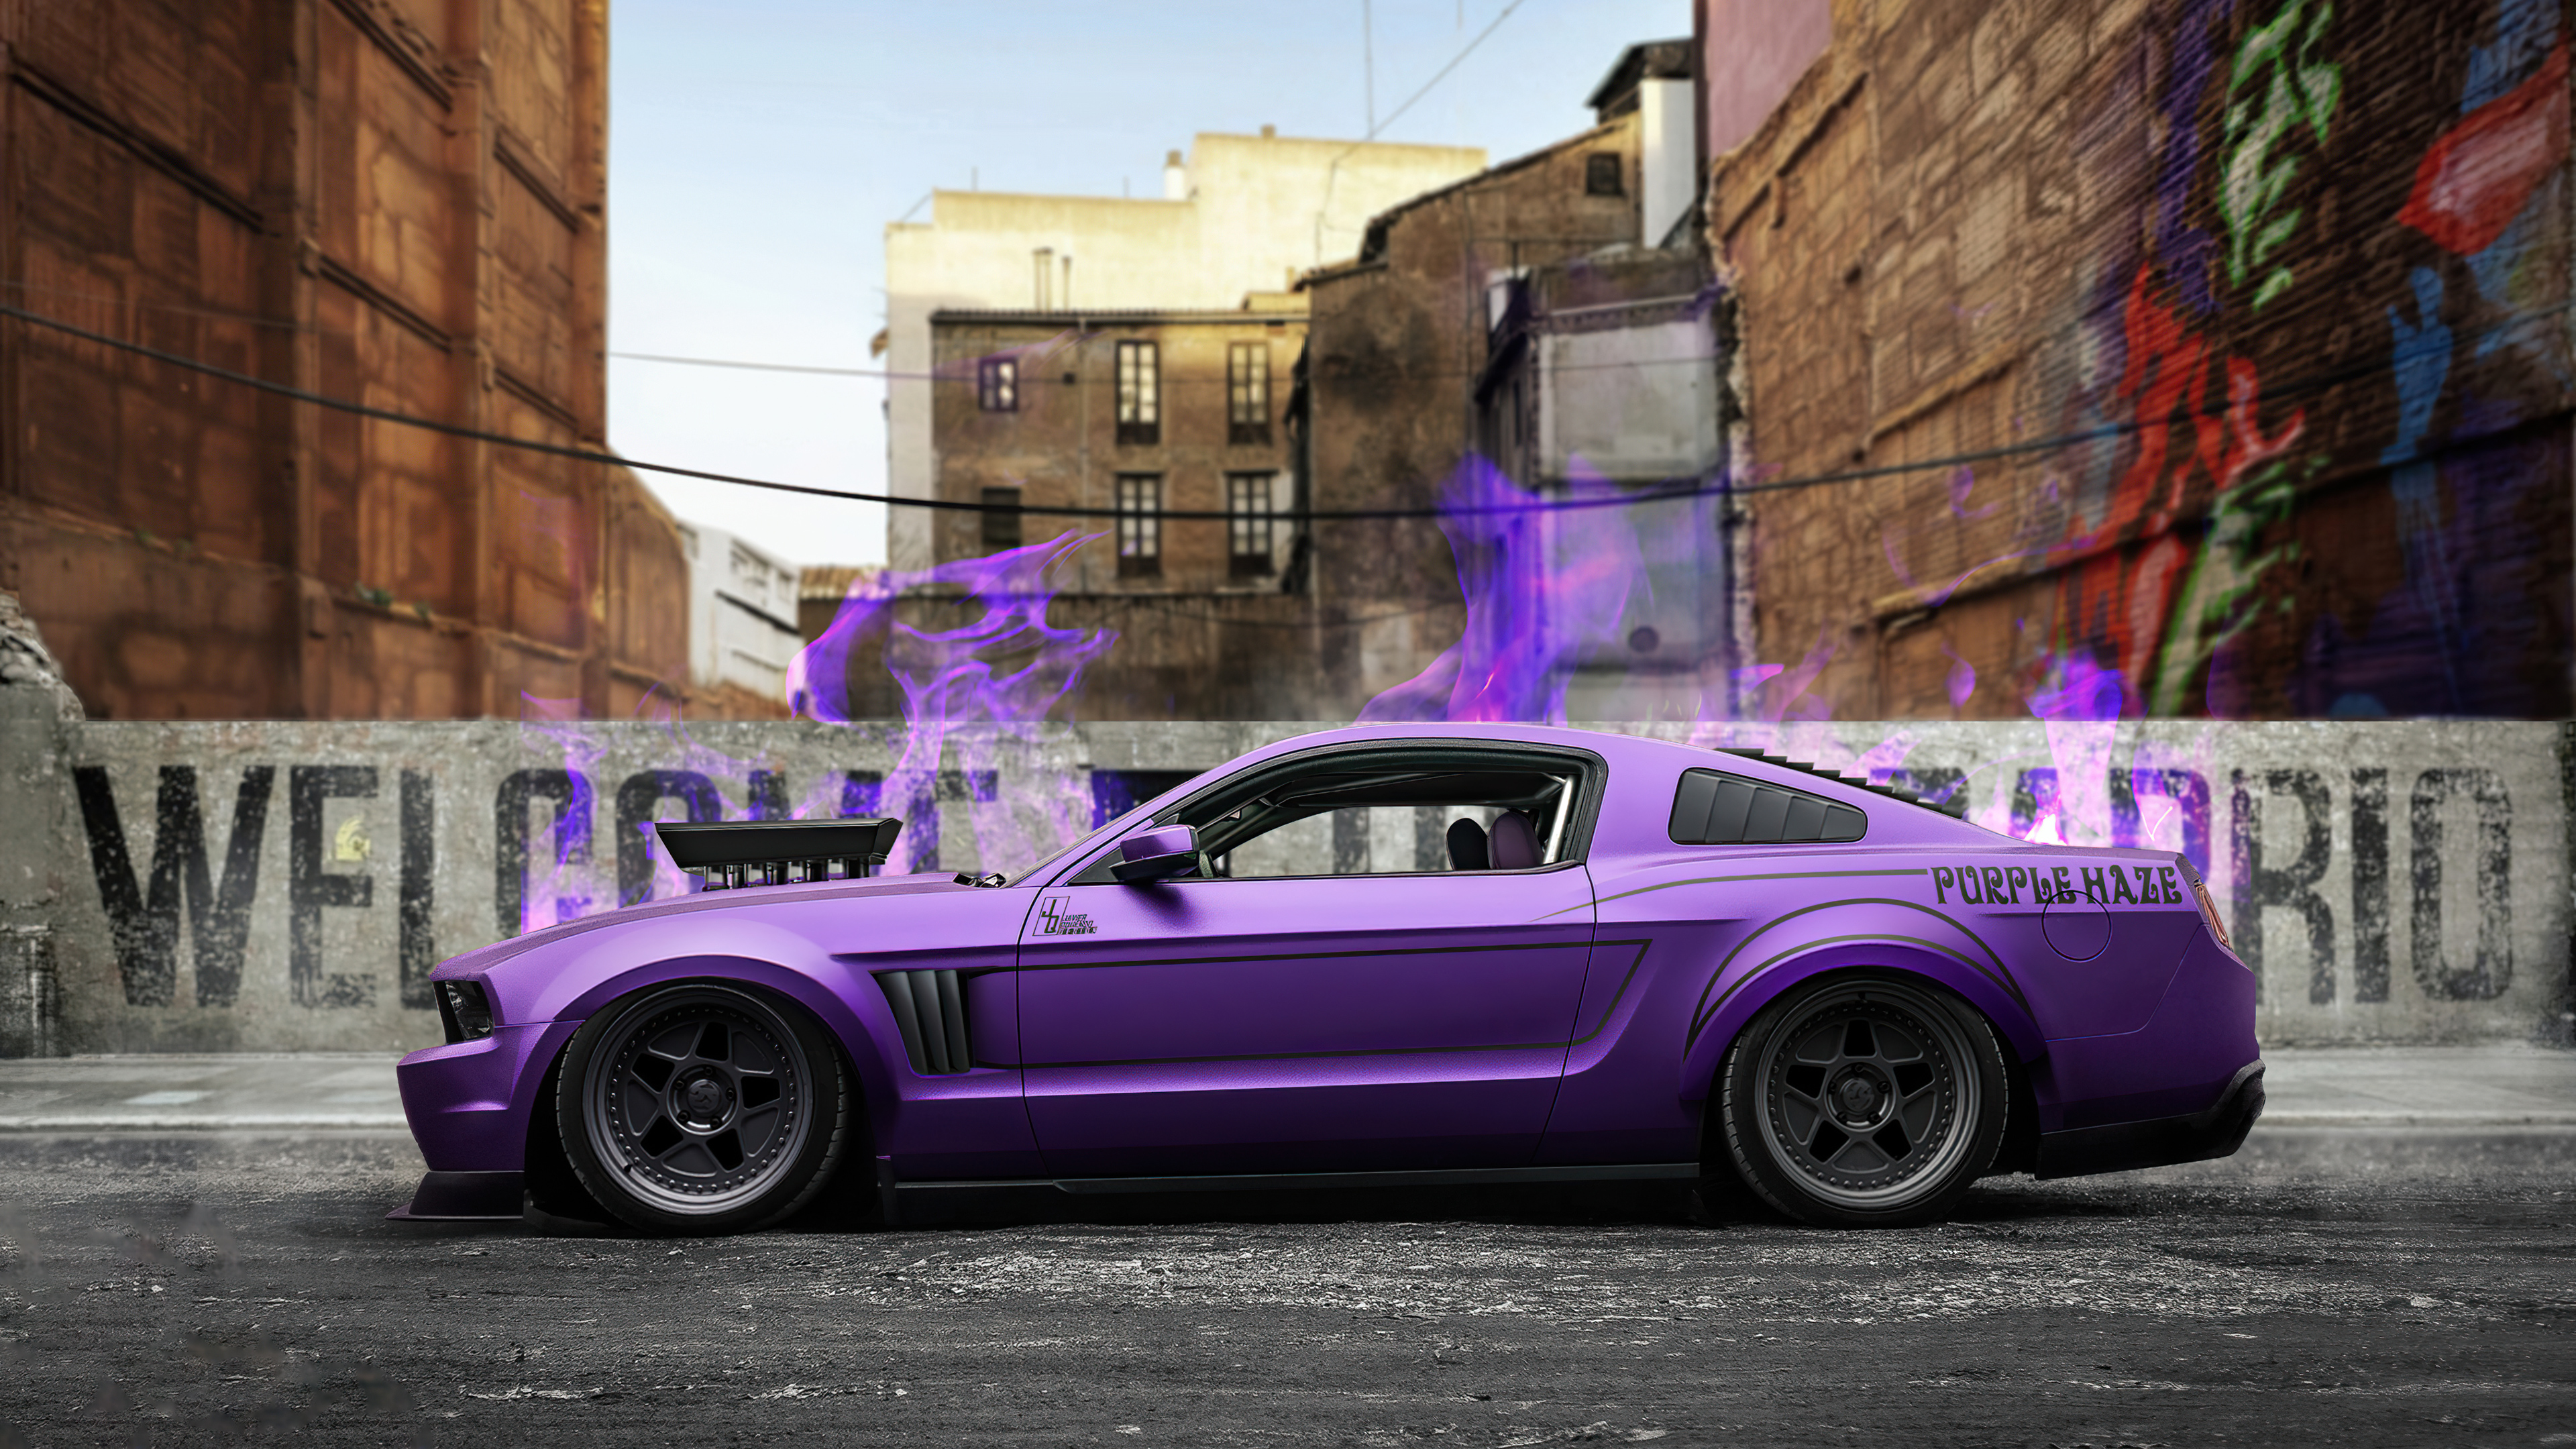 Free photo A purple Ford Mustang